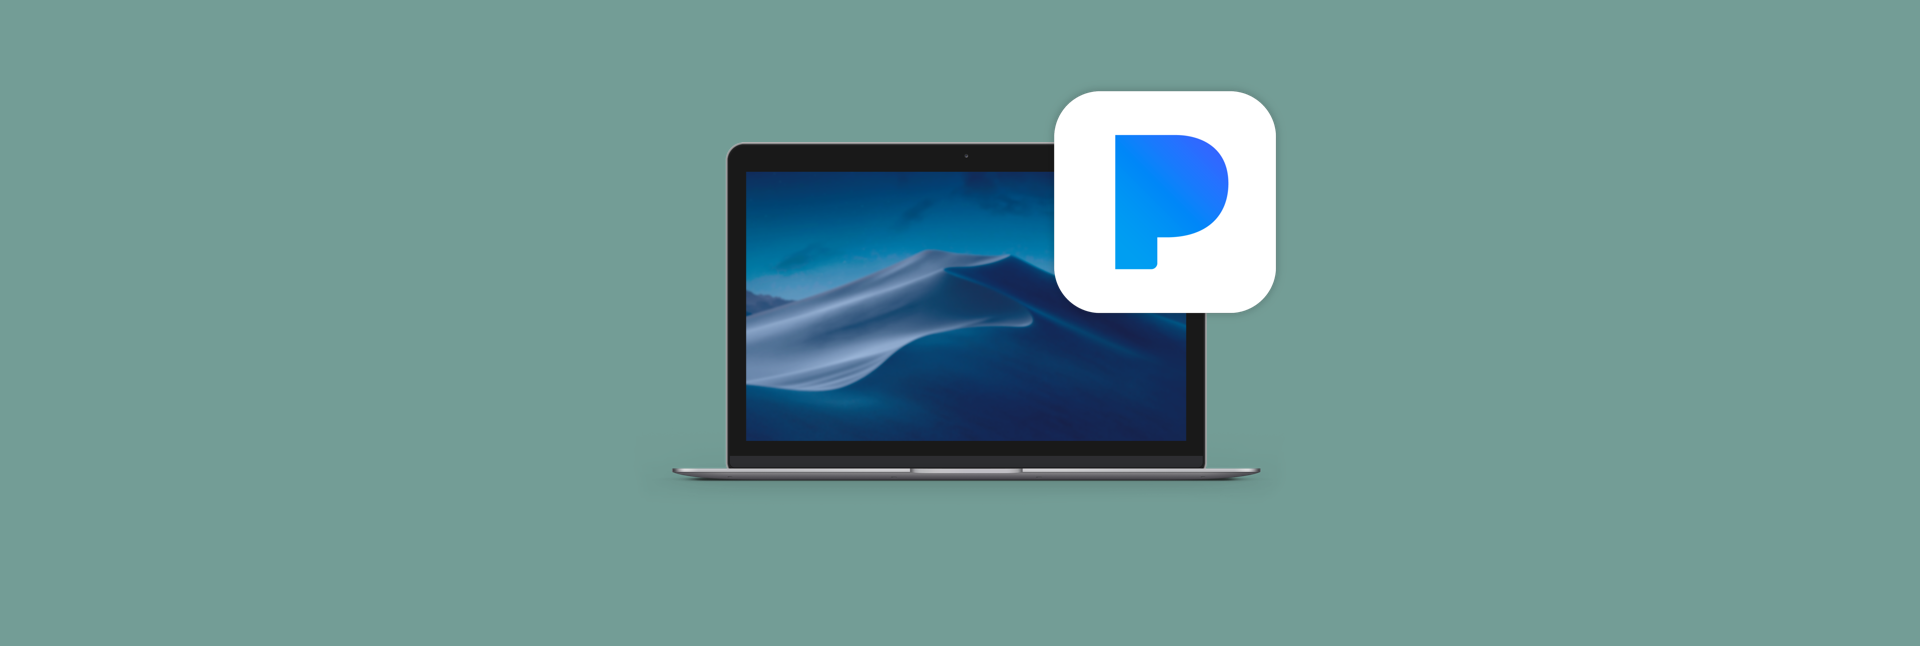 pause online pandora on mac with buttons